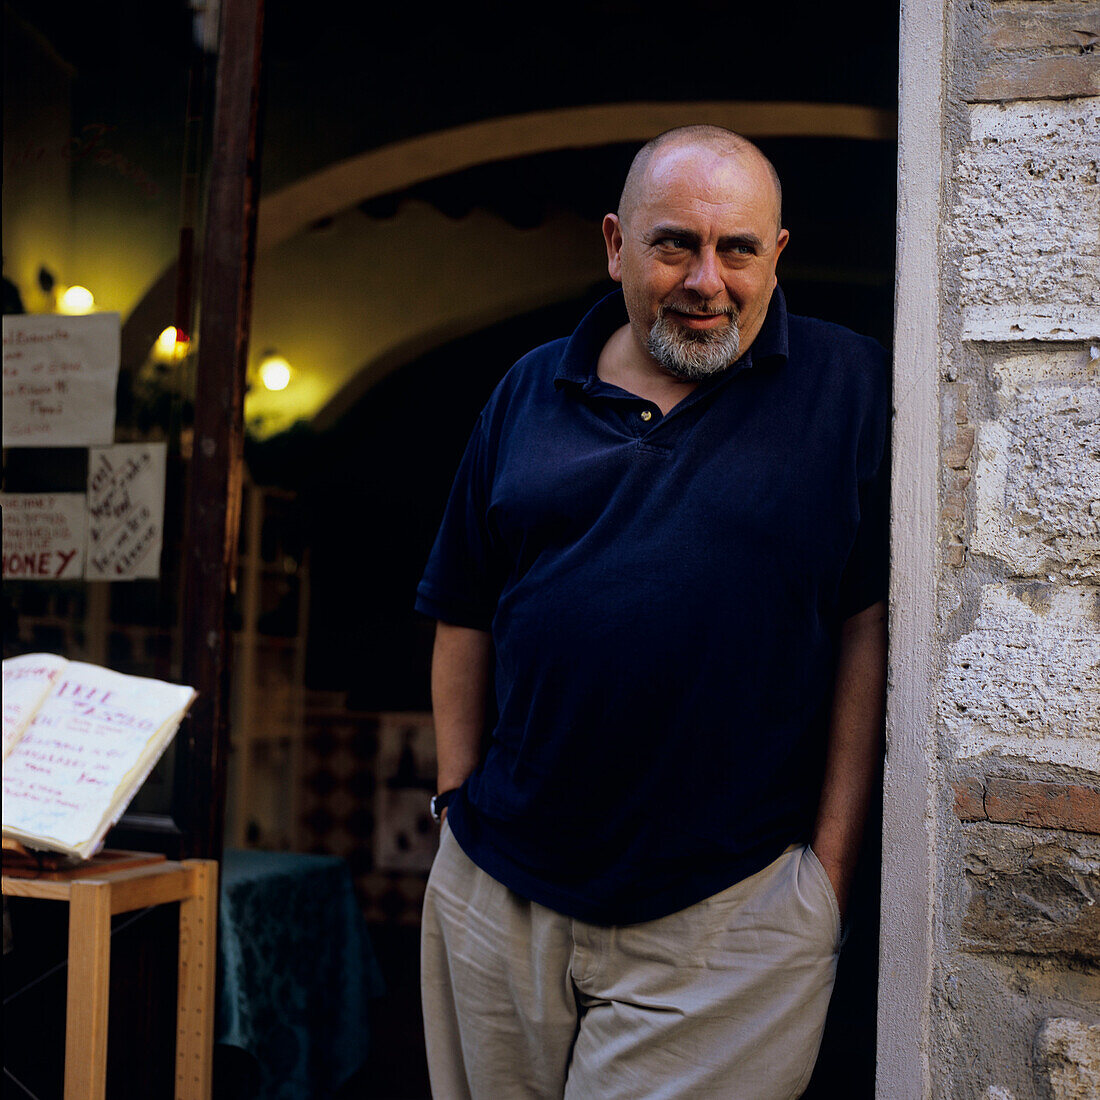 Wine merchant standing at the entrance of his wine store, Montepulciano, Tuscany, Italy